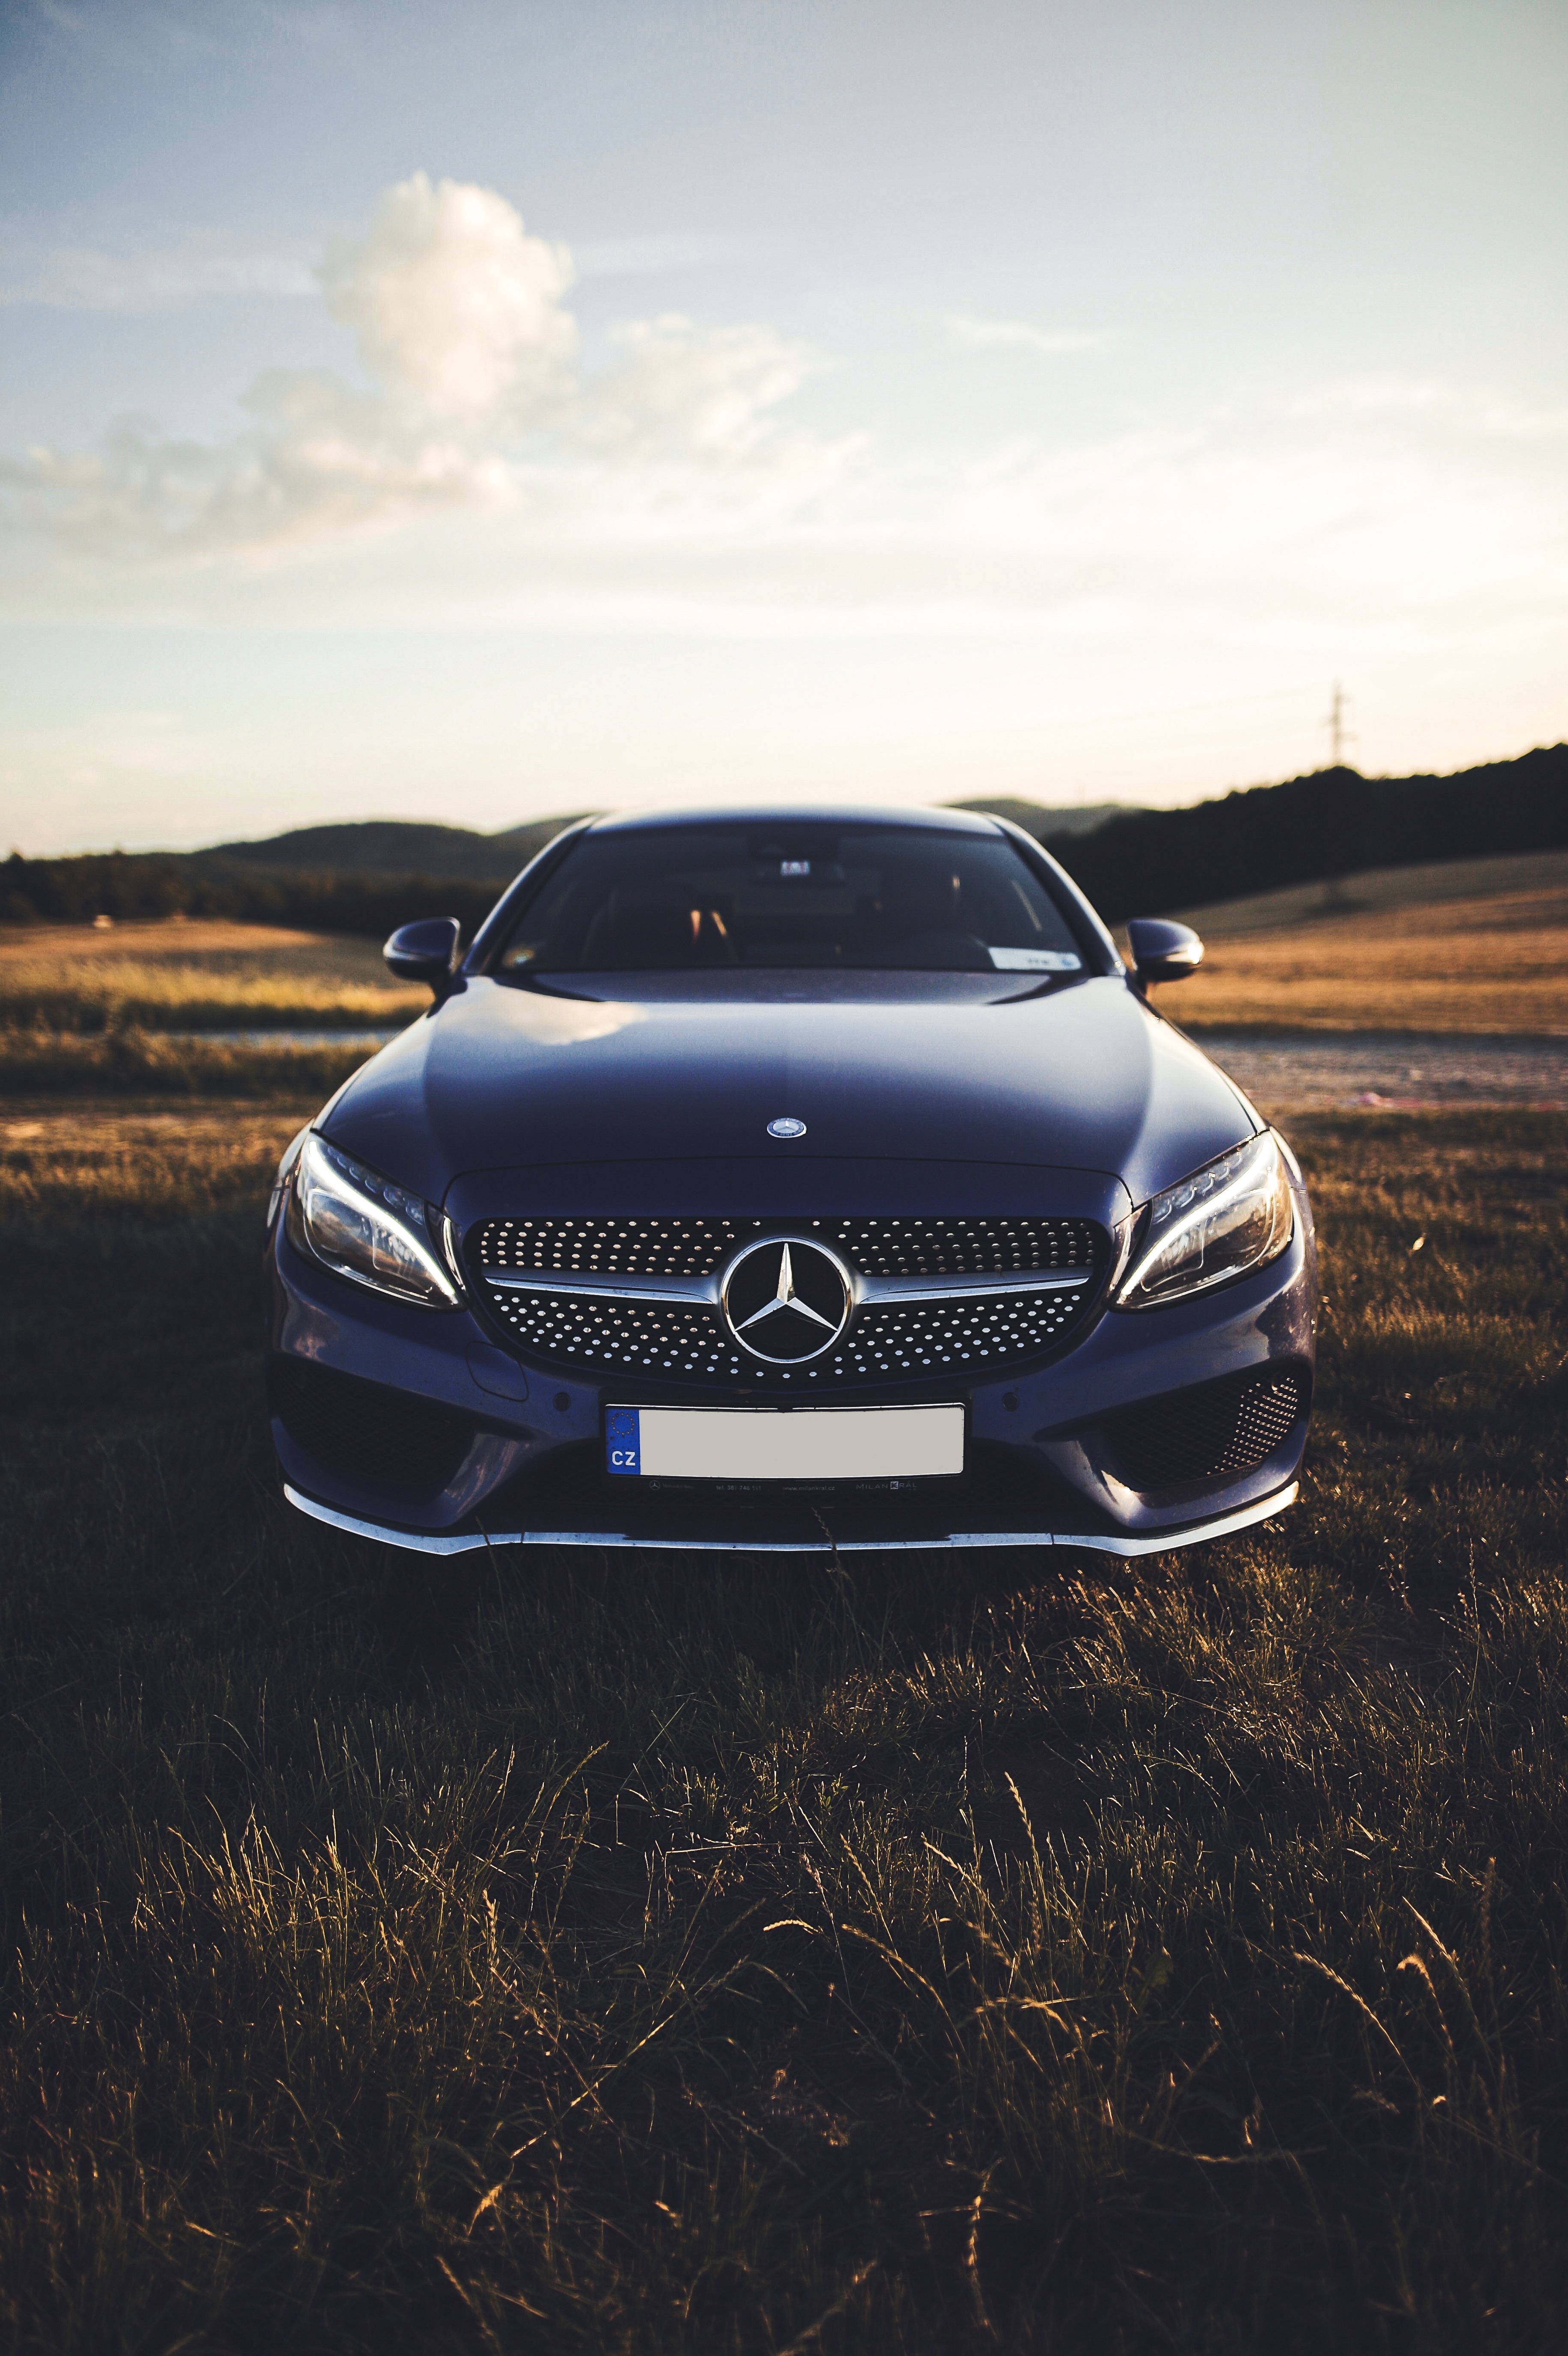 Popular Mercedes Benz Image for Phone